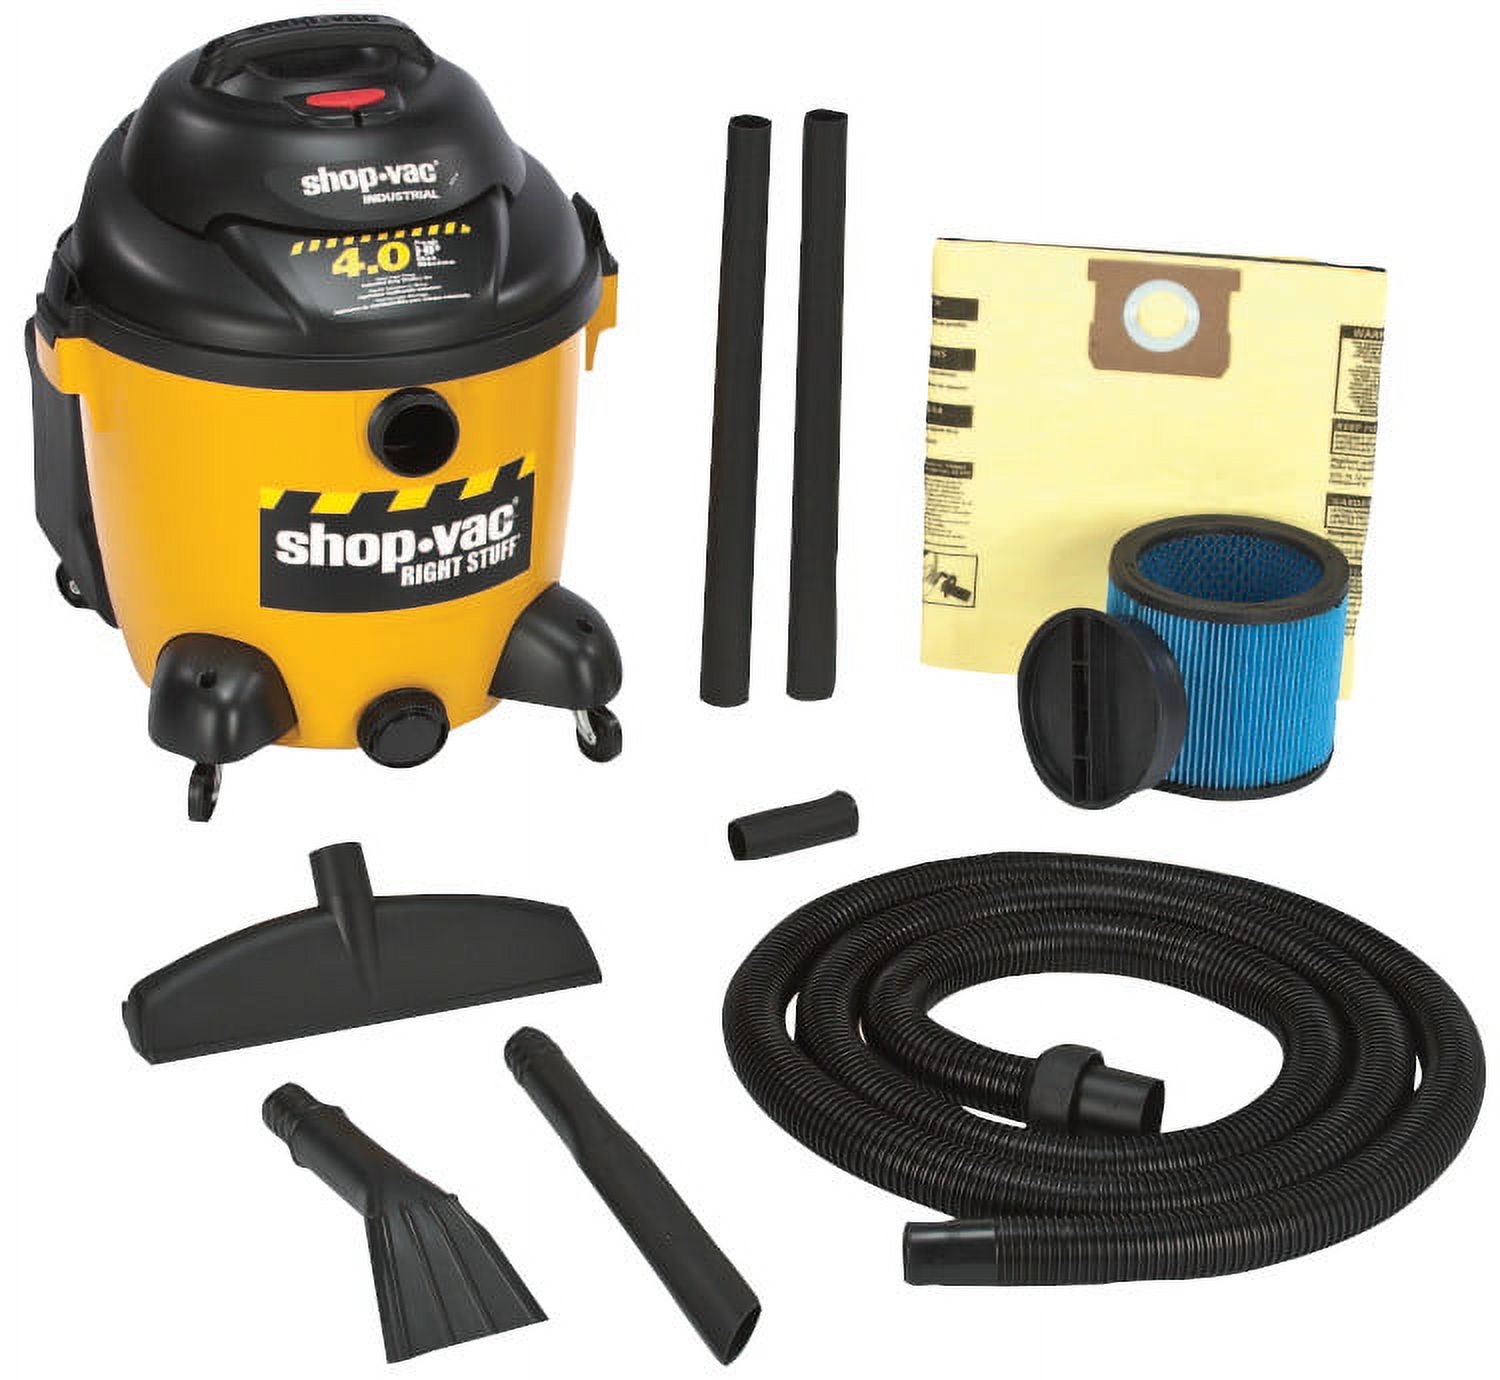 The Right Stuff Series Industrial Wet/Dry Vacuums, 10 gal, 4 hp - image 1 of 3